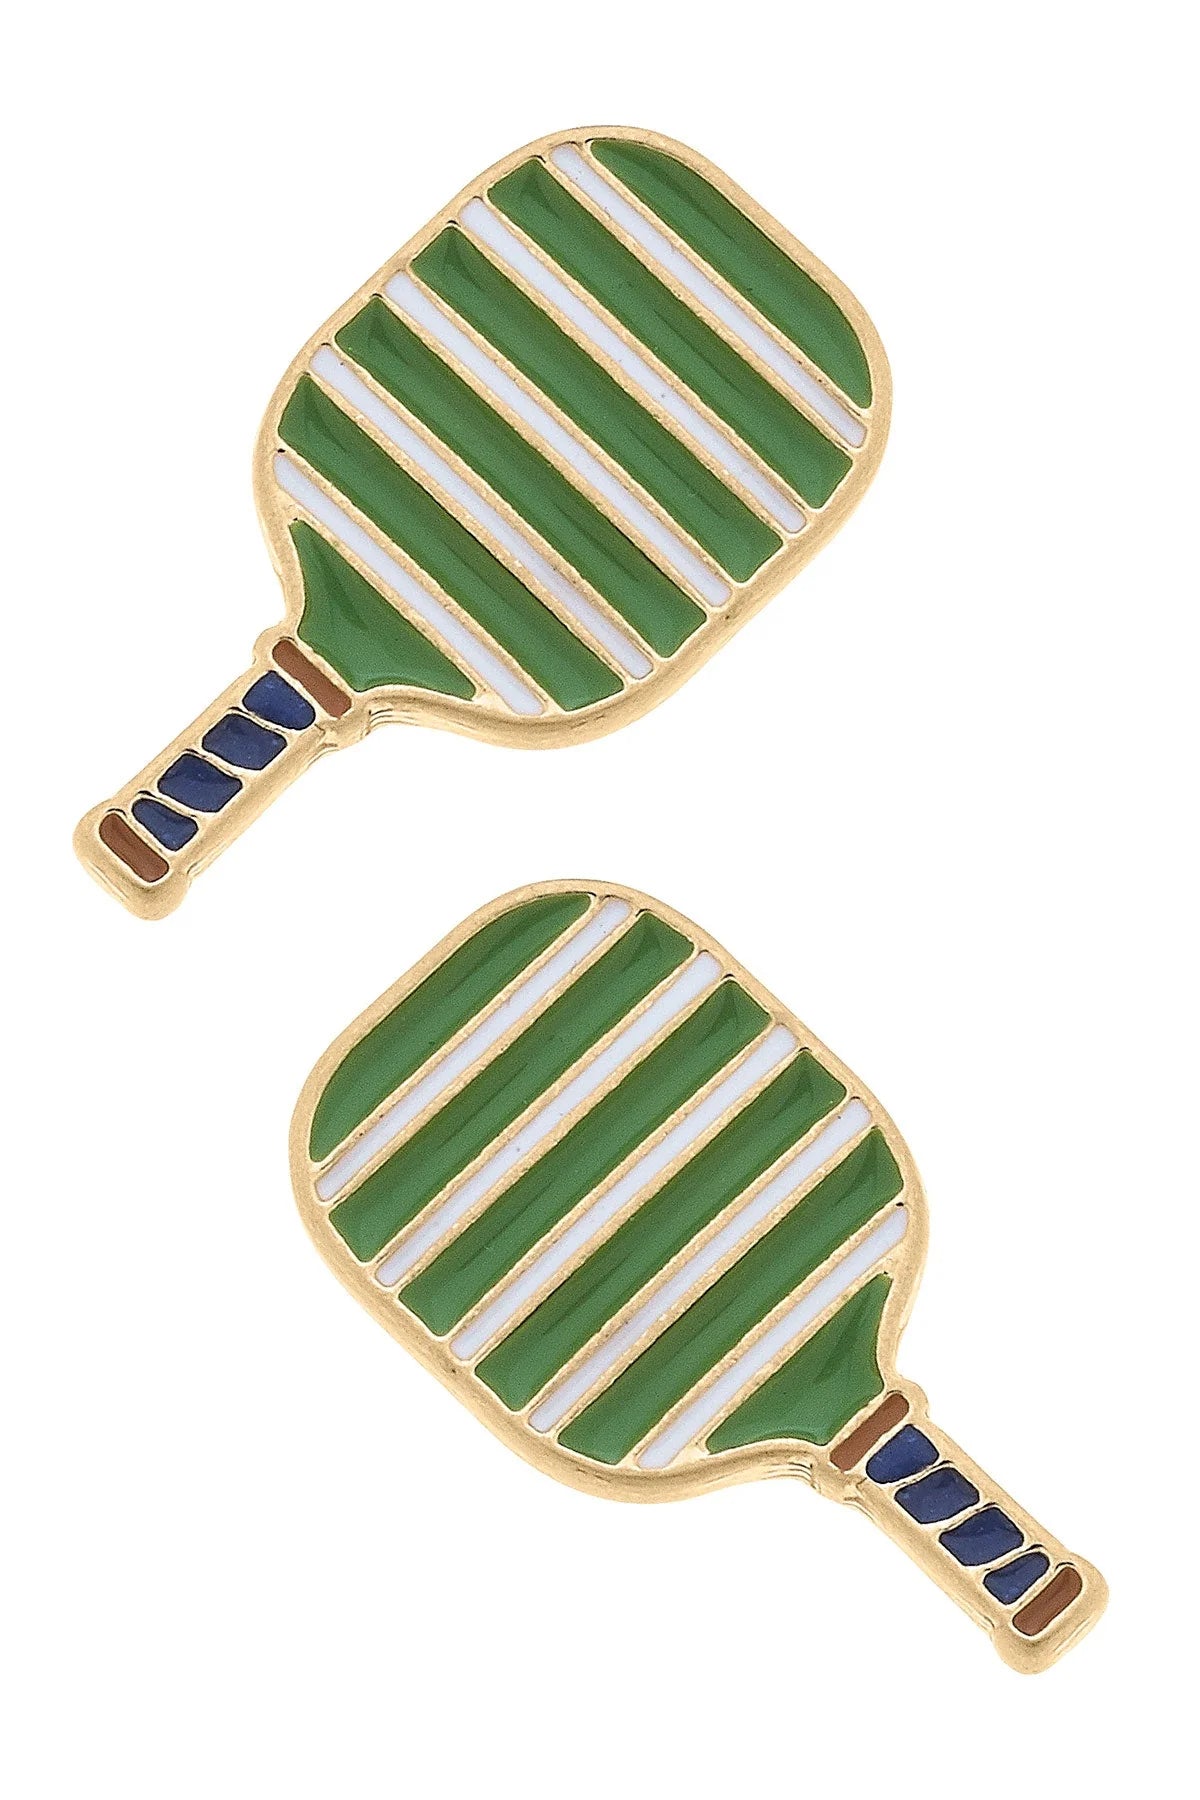 Green Ellie Pickleball Stud-410 Jewelry-Simply Stylish Boutique-Simply Stylish Boutique | Women’s & Kid’s Fashion | Paducah, KY